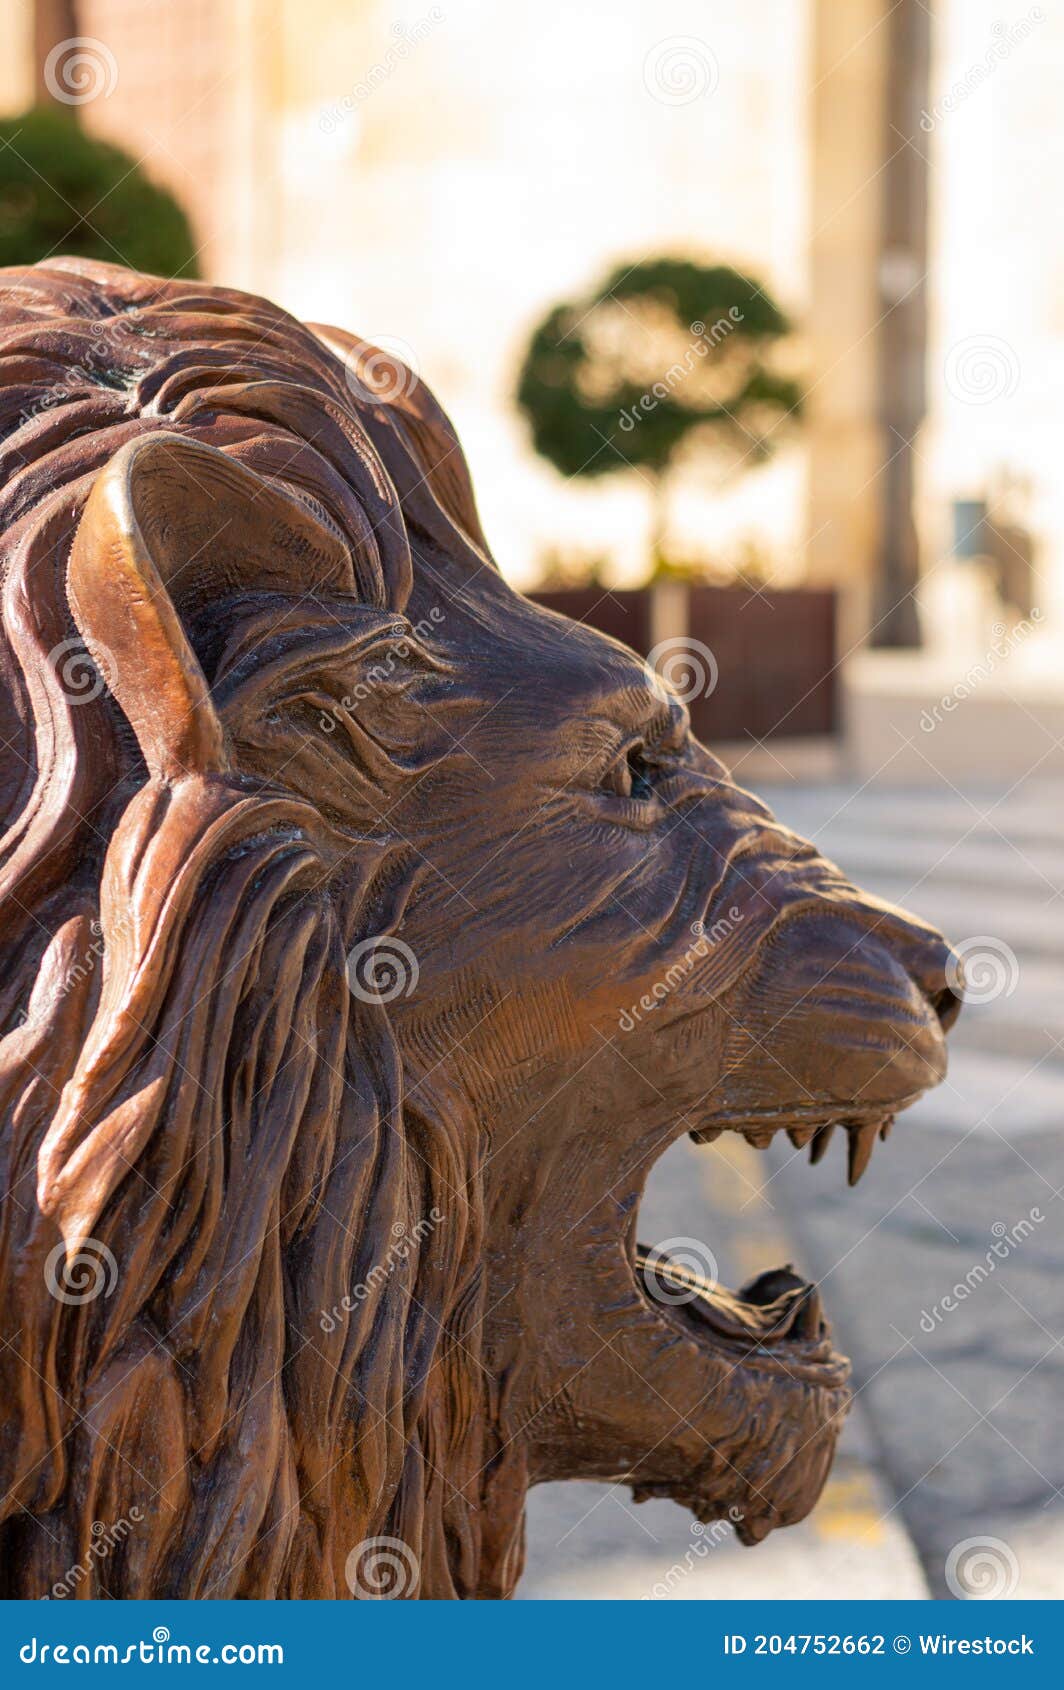 Vertical Closeup of a Roaring Lion Statue Stock Photo - Image of ...